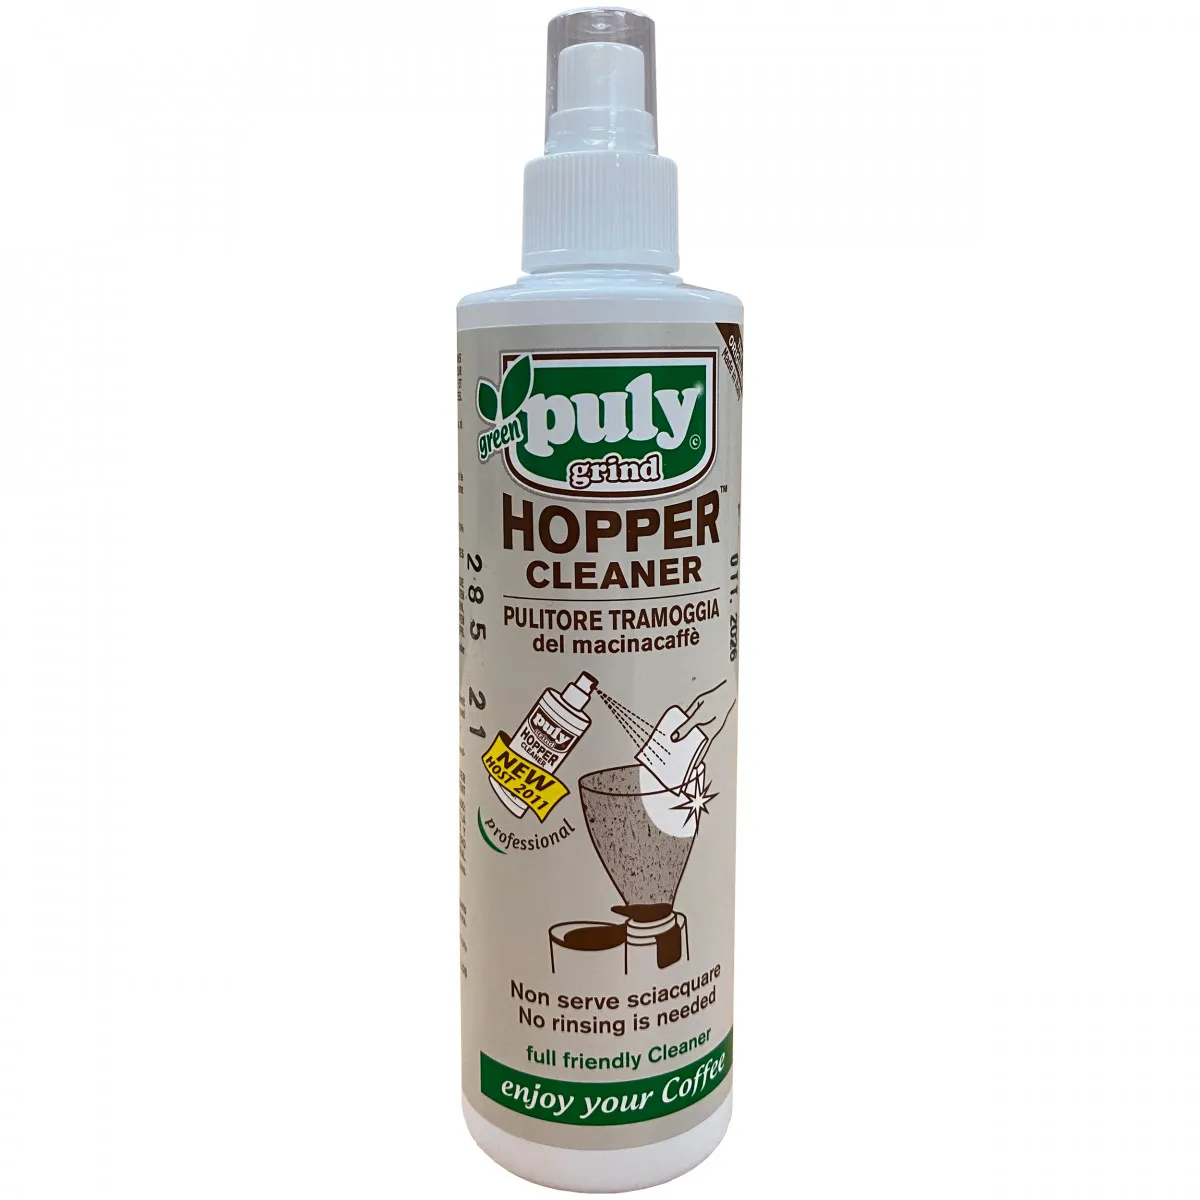 PULY GRIND HOPPER CLEANER 200ml#1